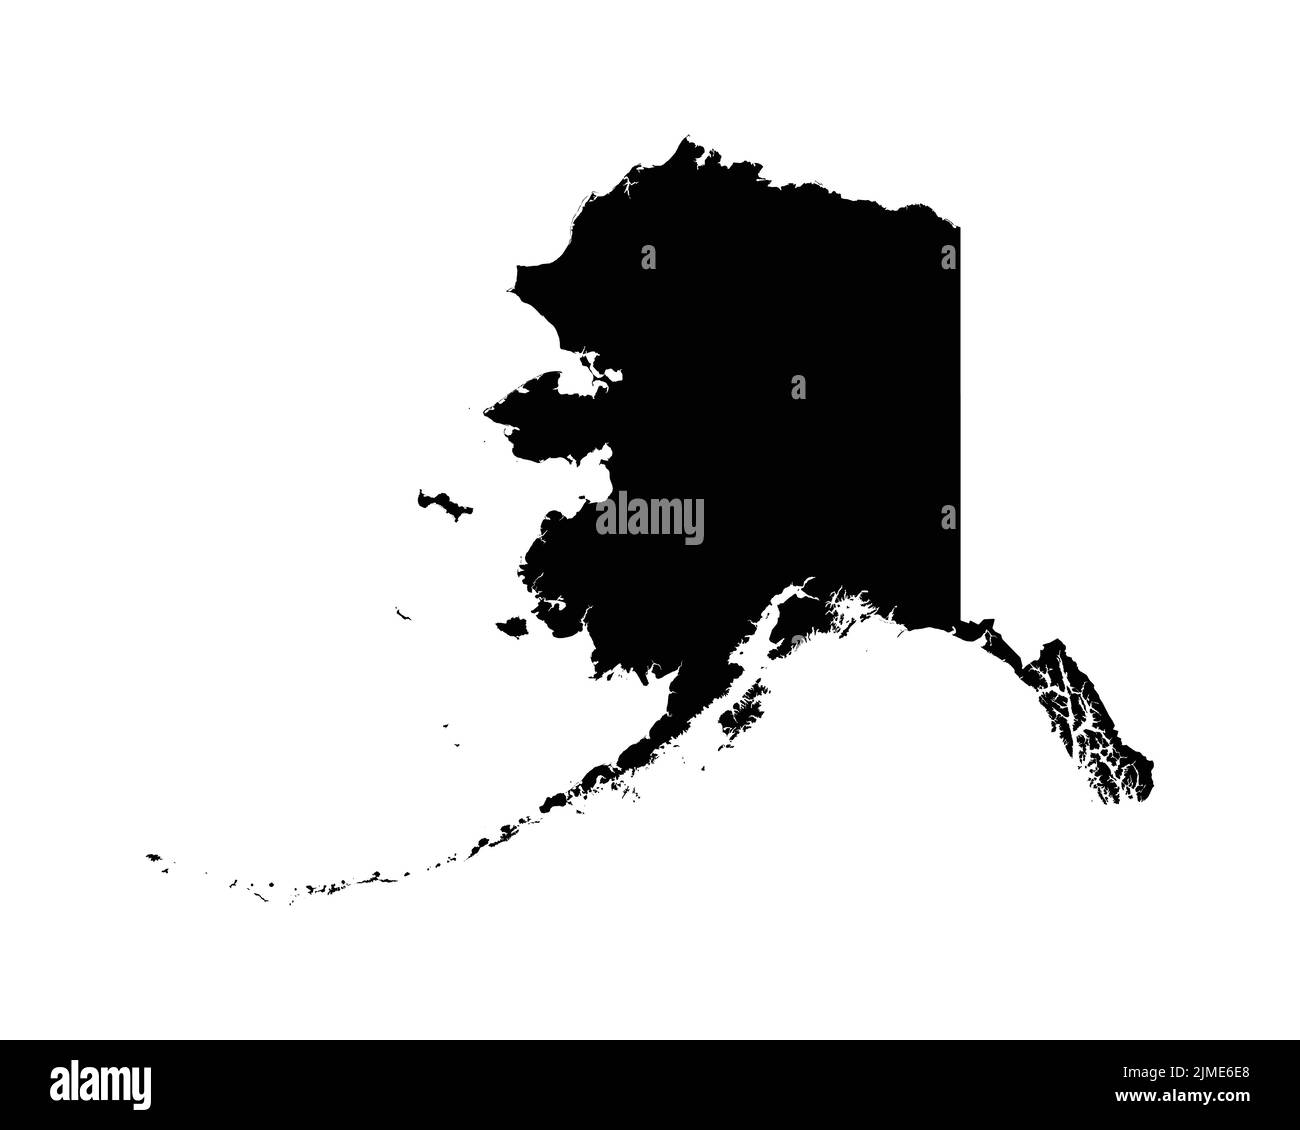 Alaska US Map. AK USA State Map. Black and White Alaskan State Border Boundary Line Outline Geography Territory Shape Vector Illustration EPS Clipart Stock Vector